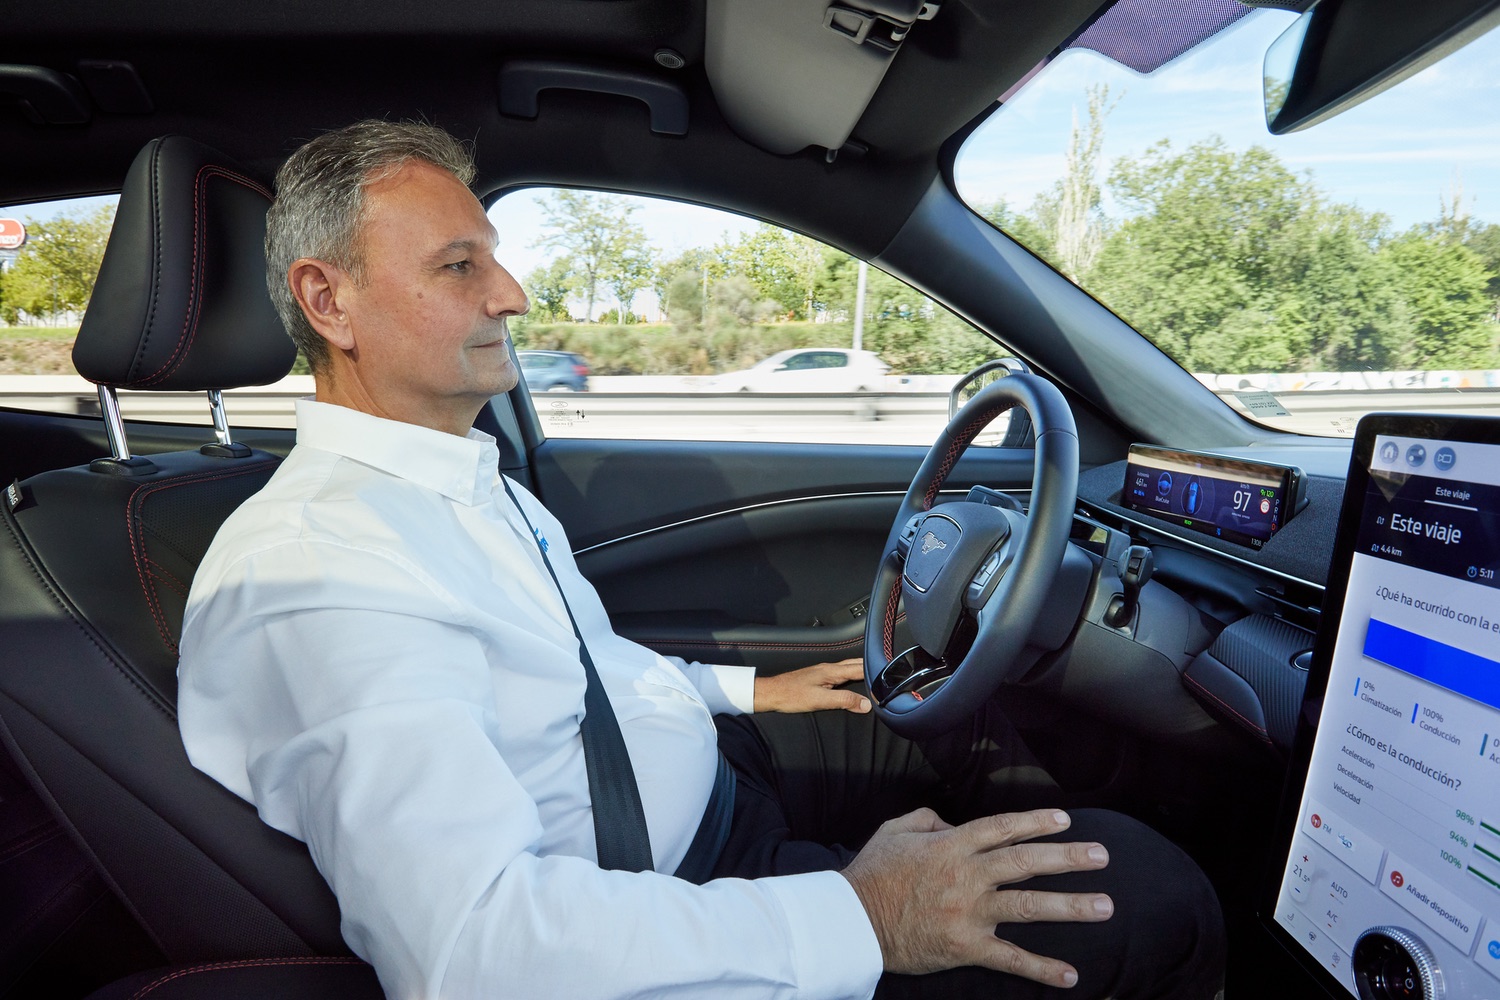 Spain Becomes Third Country To Approve Ford’s BlueCruise Hands-Free Driving Technology